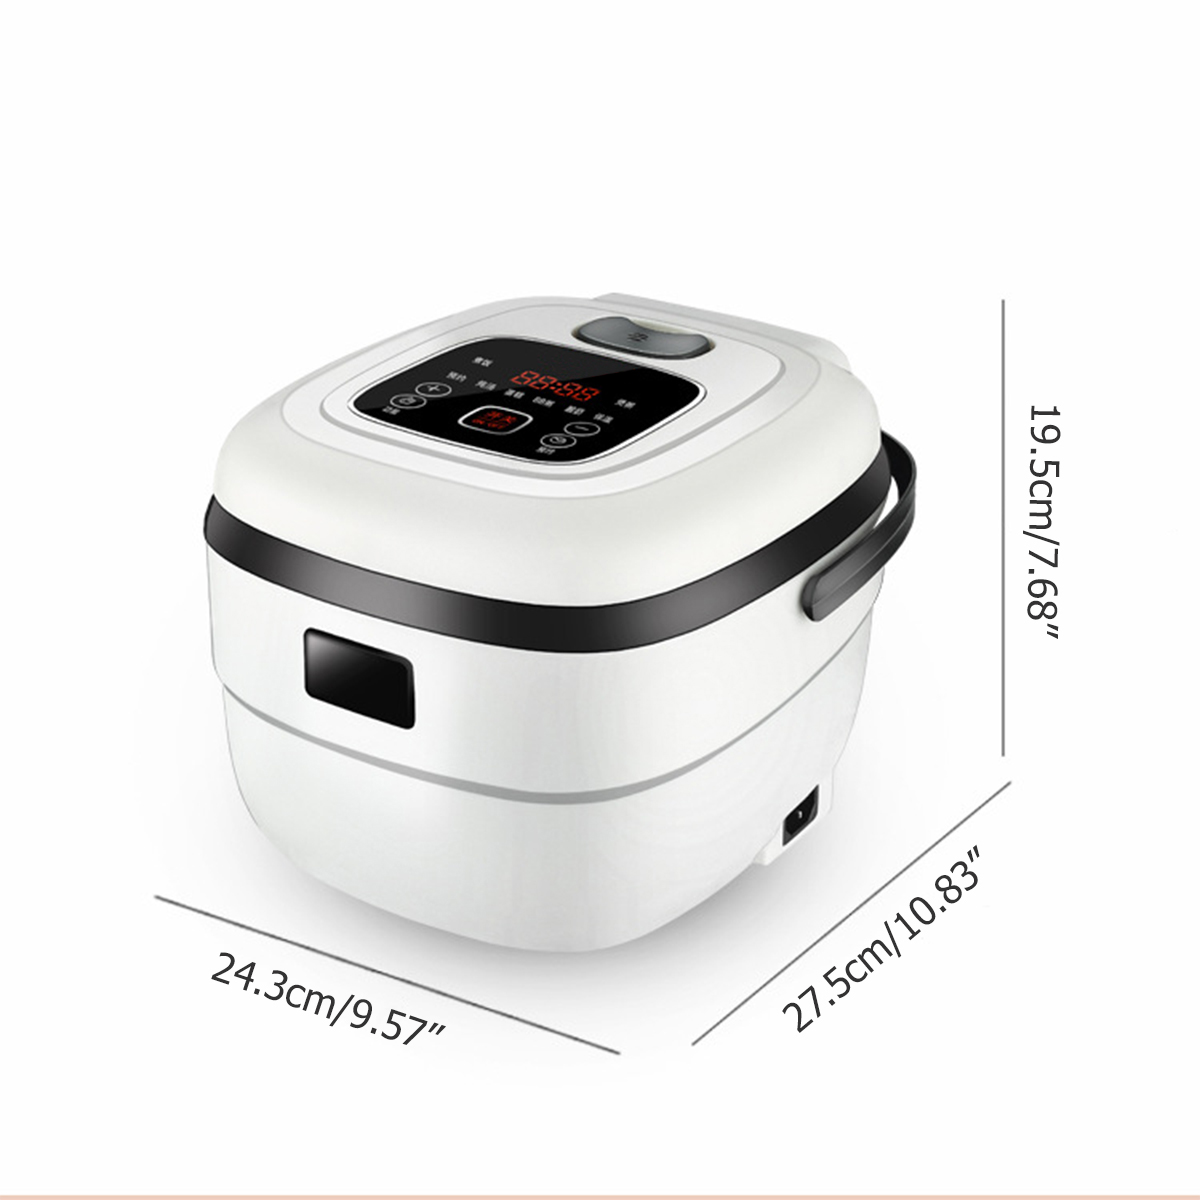 2.5L 400W Smart Mini Multifunctional Rice Cooker for Home Dormitory Household Mini Cooking Machine